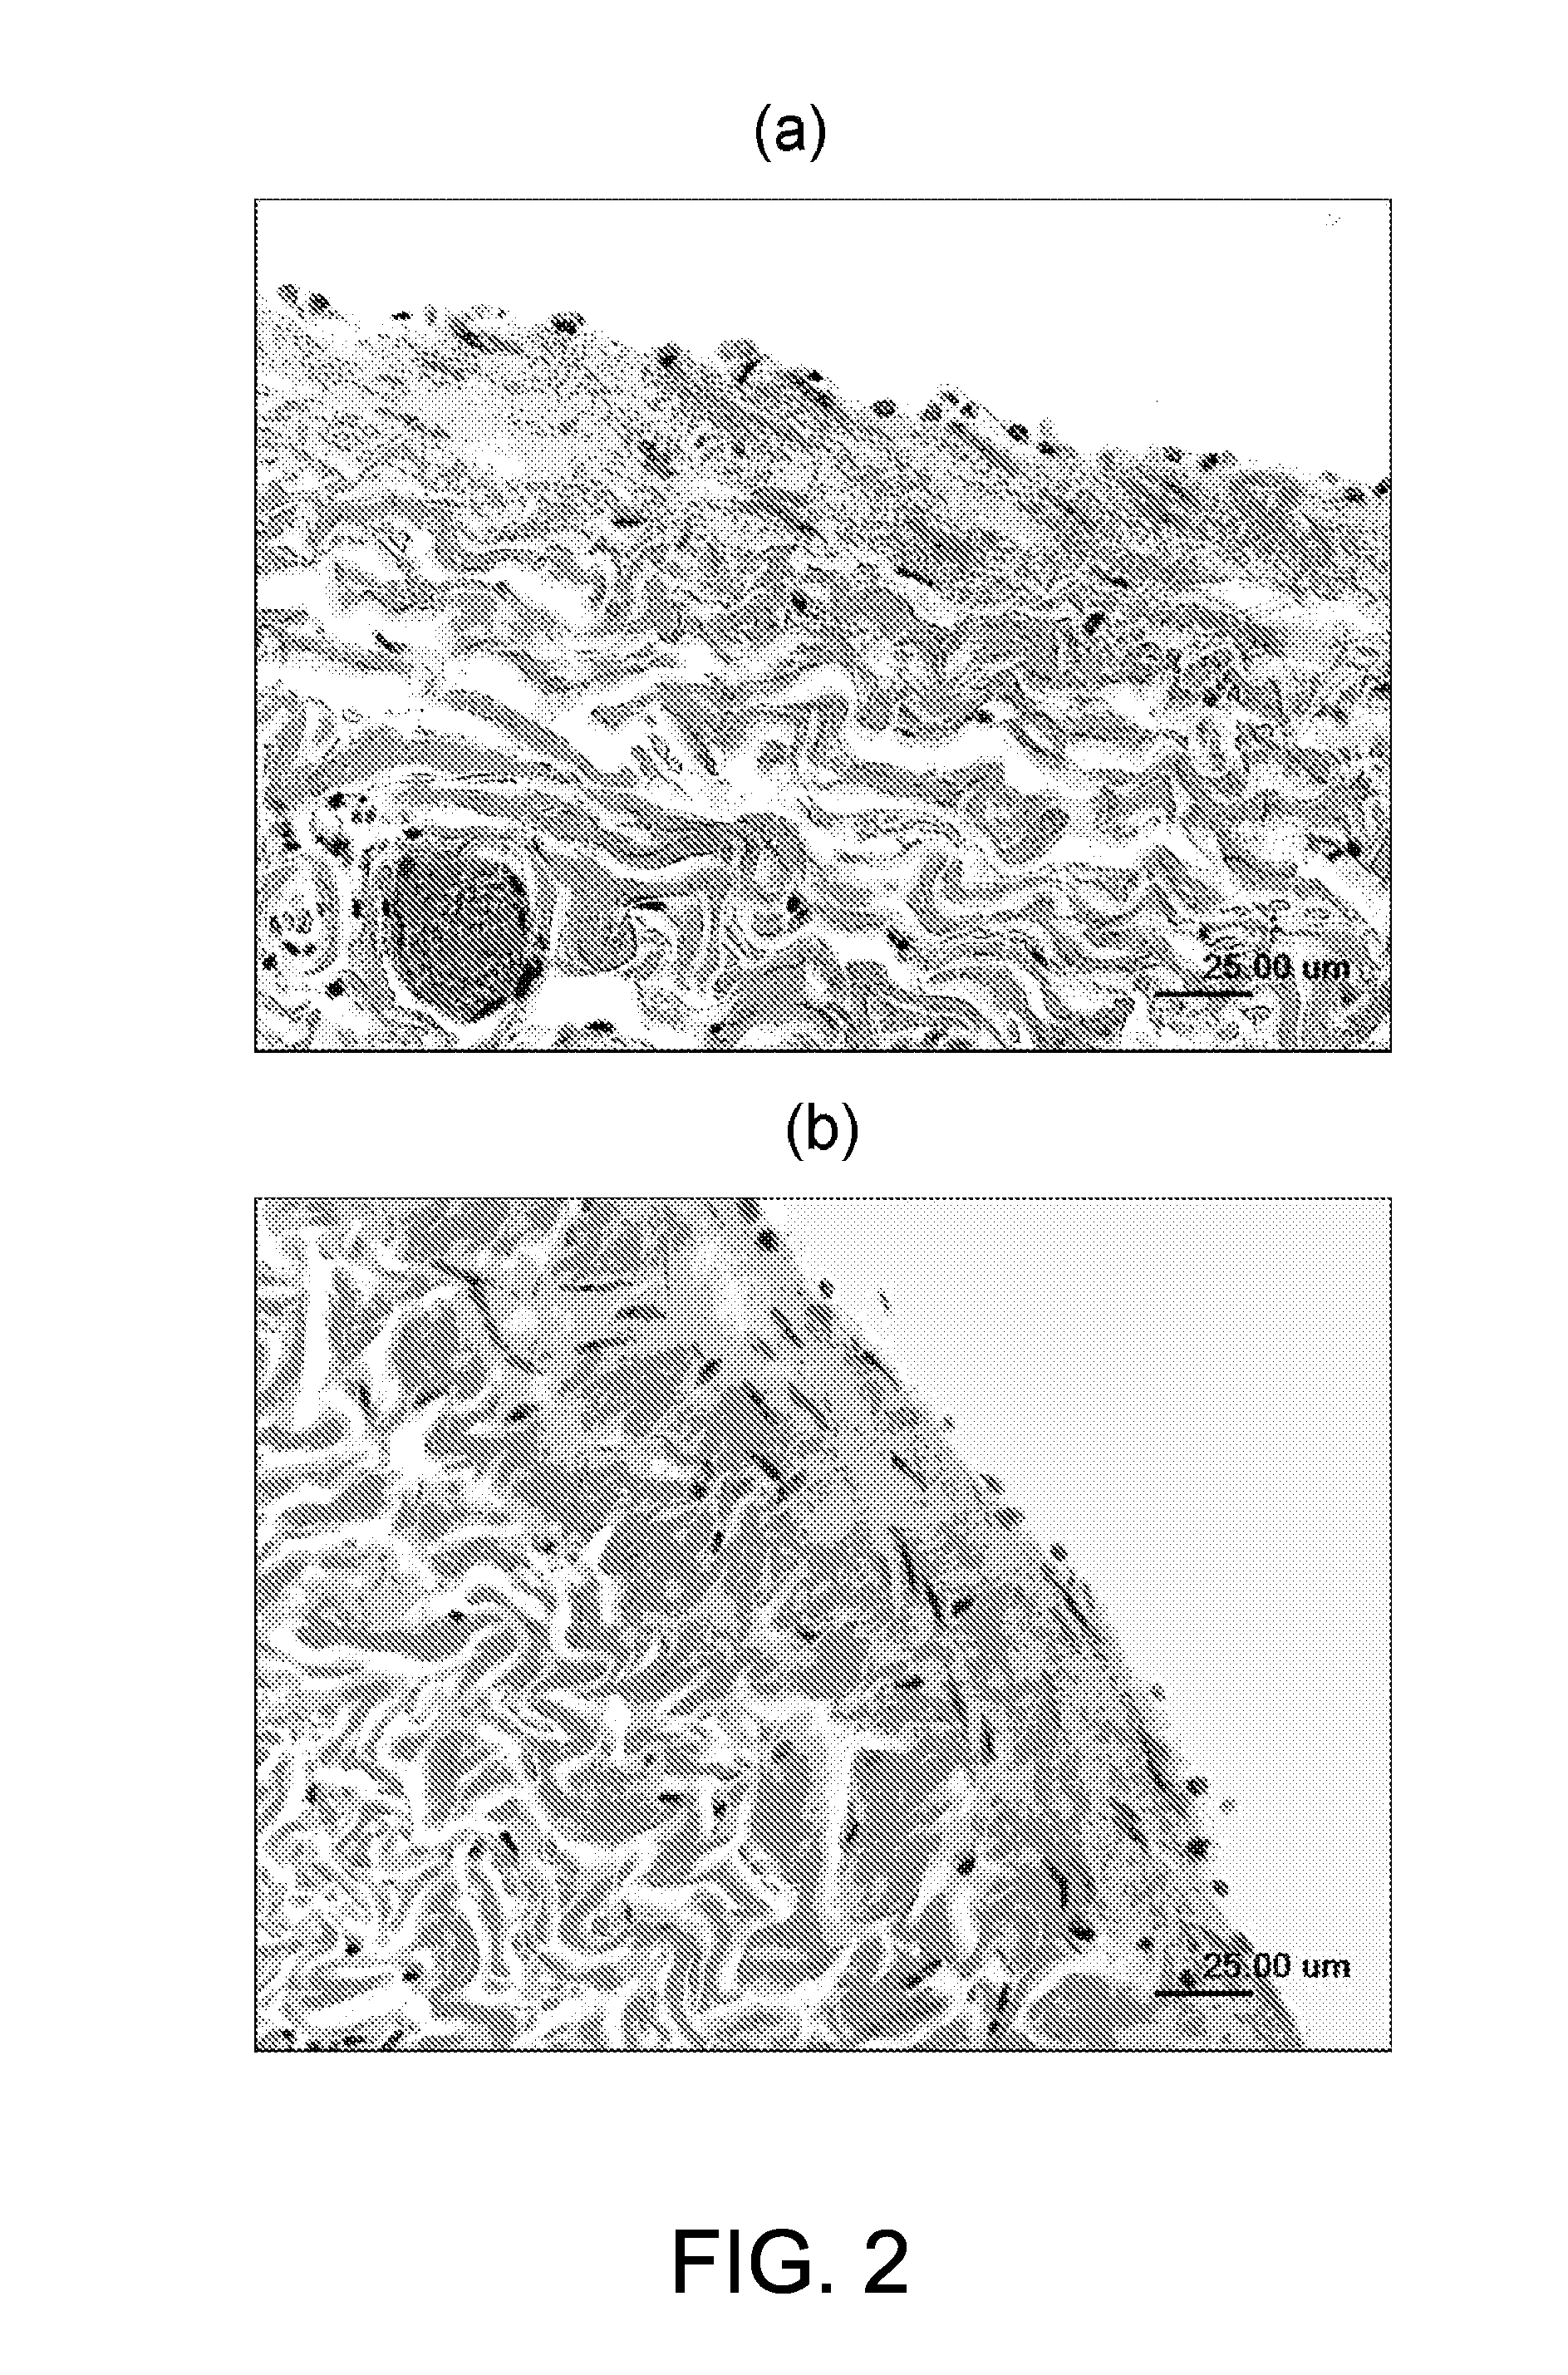 Articles and methods of treating vascular conditions